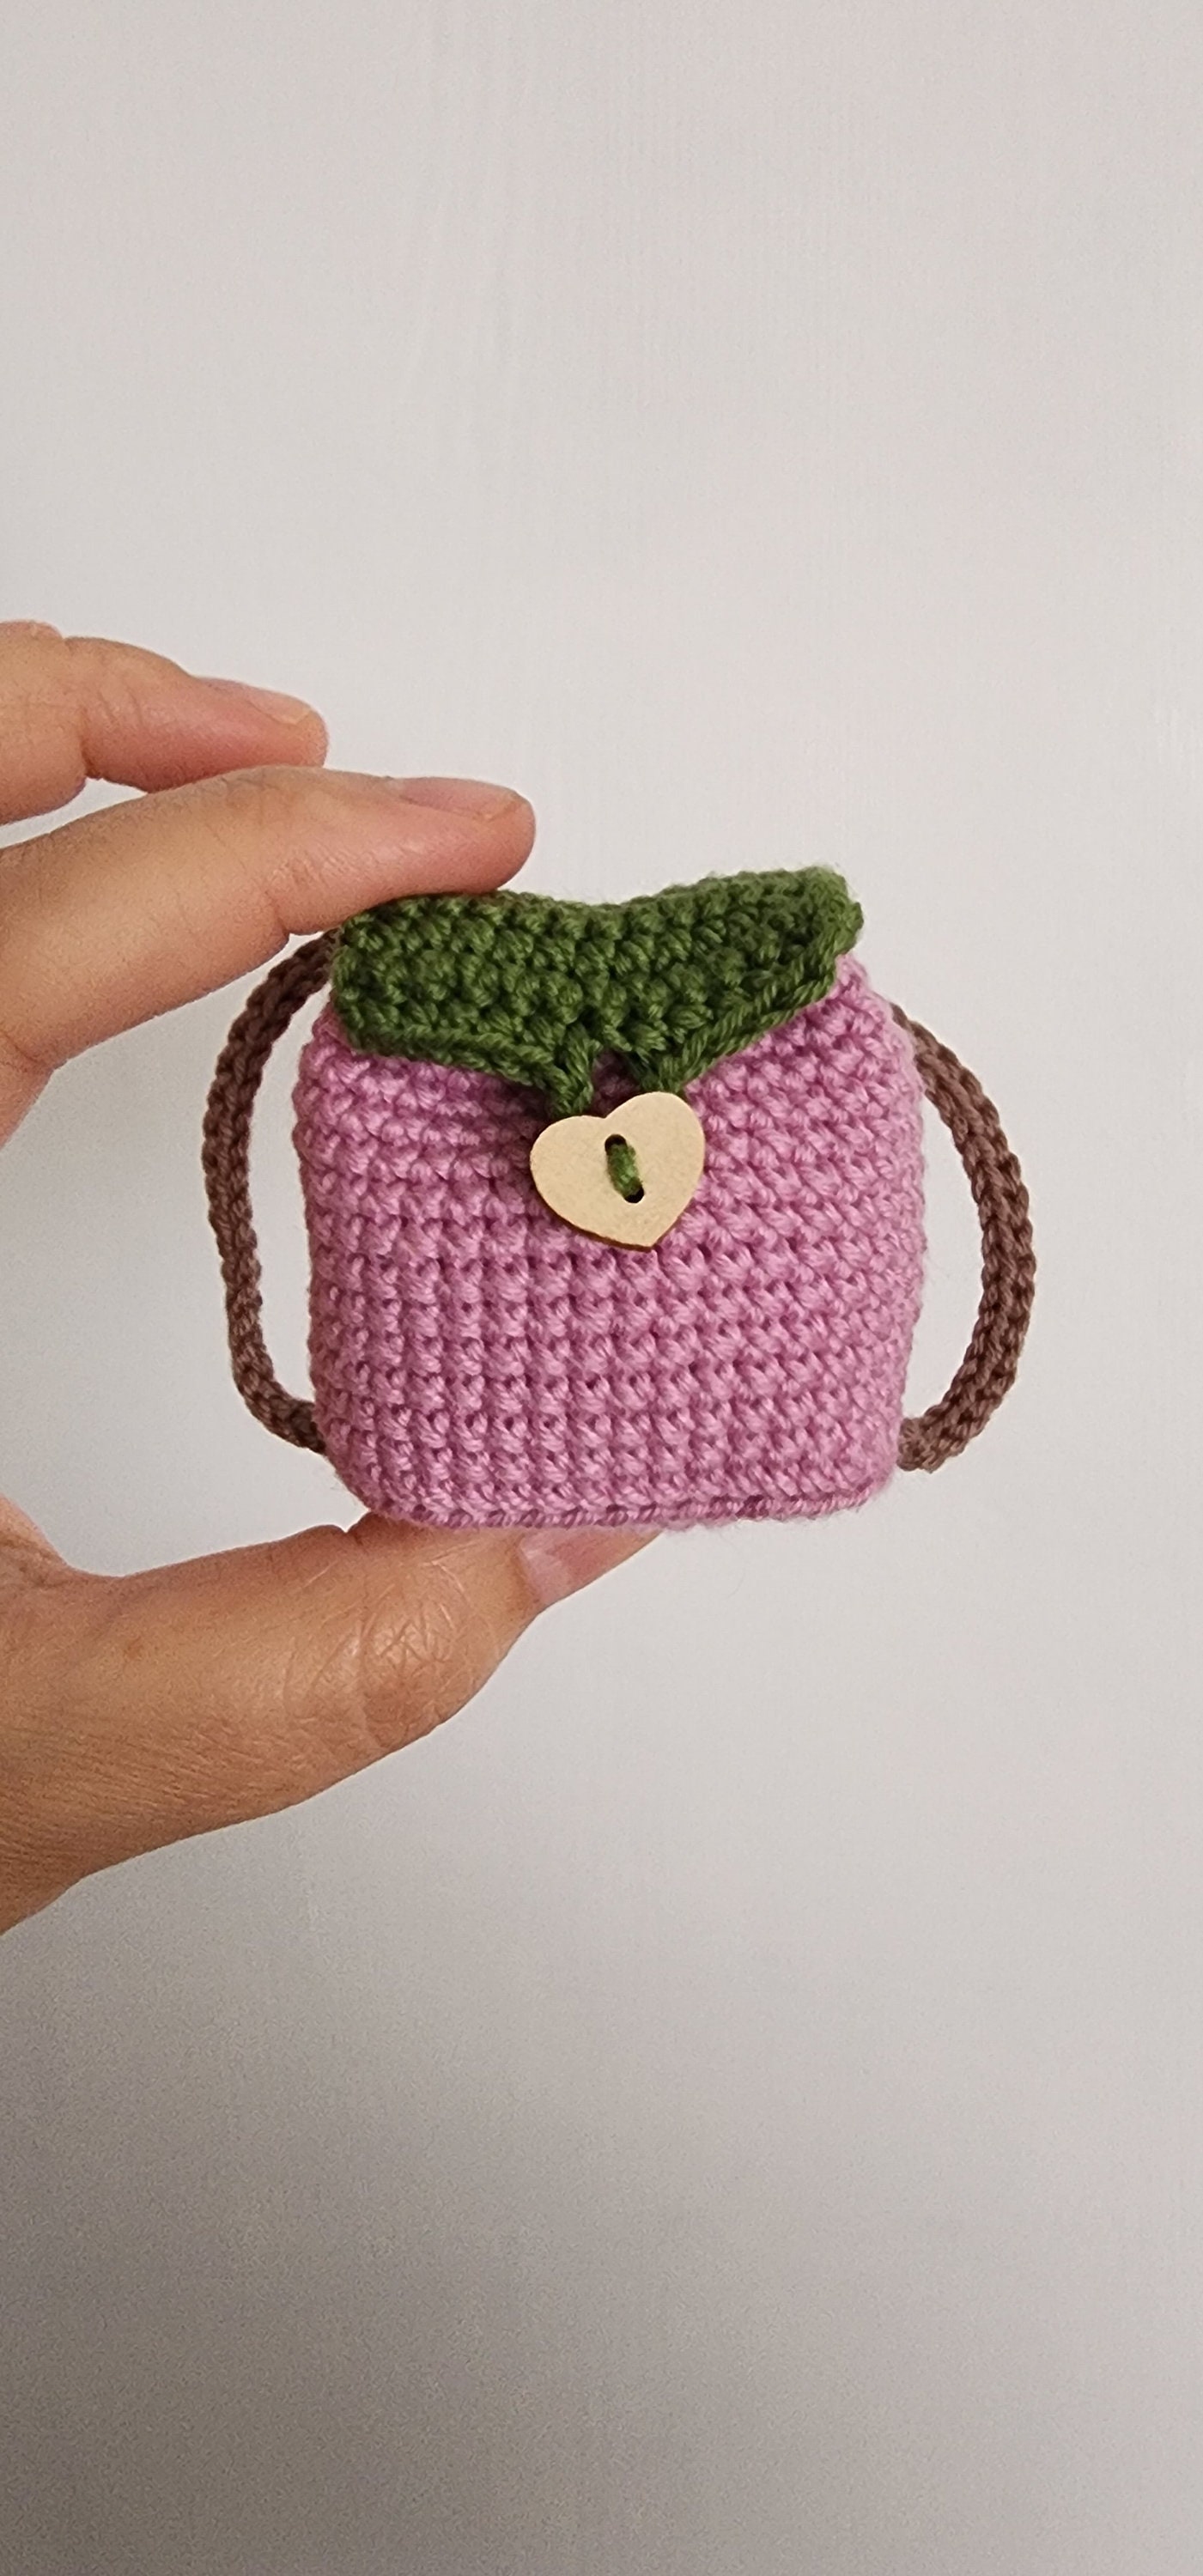 Backpack for Toys Amigurumi Pattern by Scandistyle Dolls - Hobium